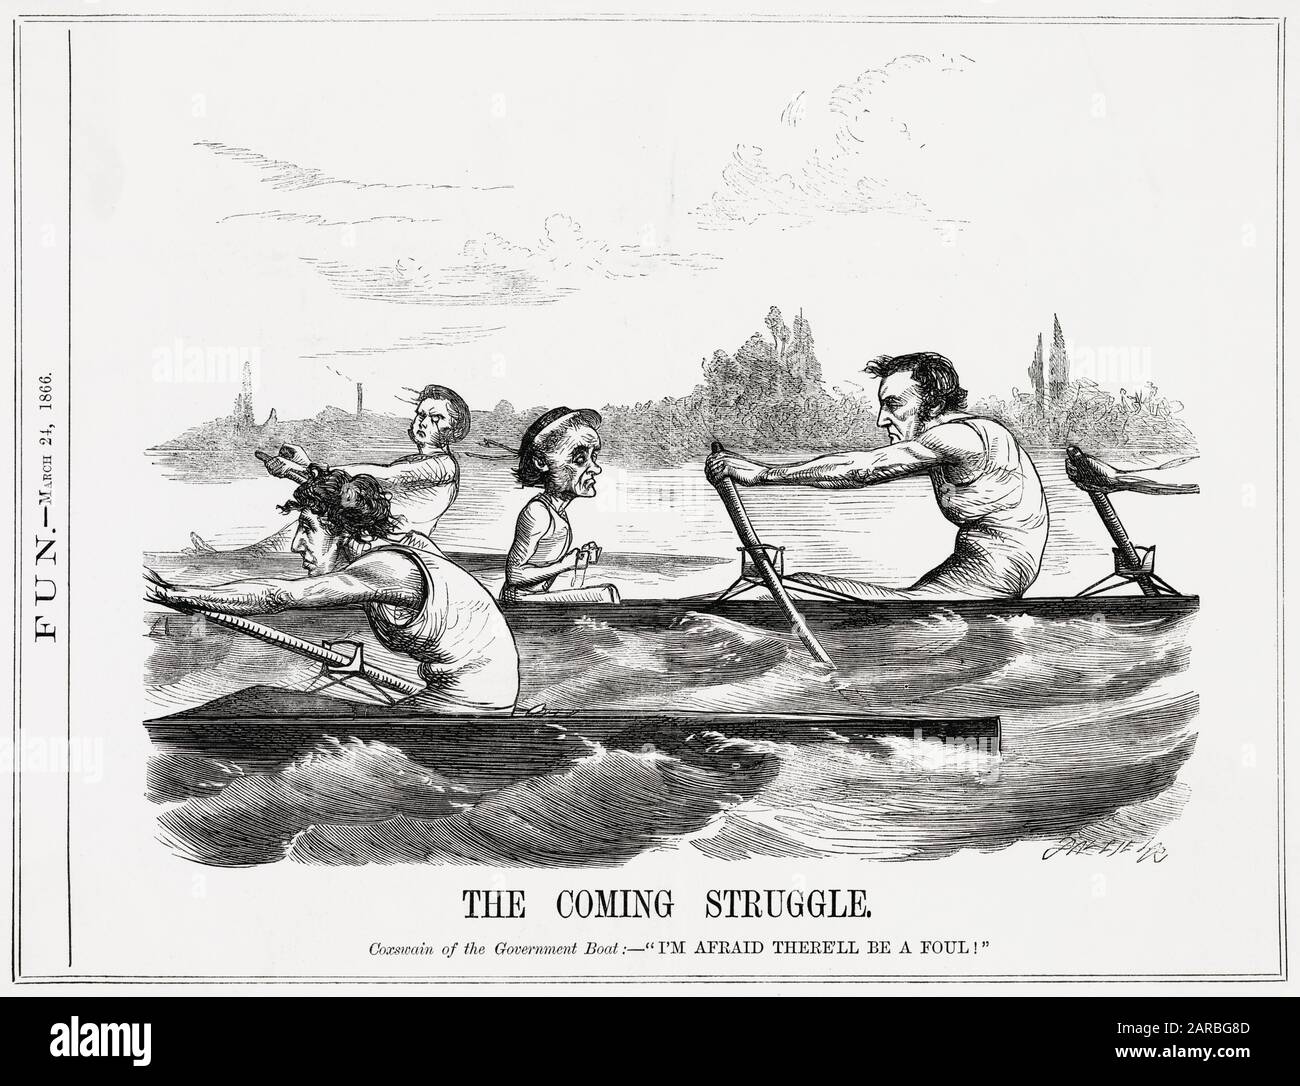 Cartoon, The Coming Struggle -- using the Boat Race as an analogy for politics, Disraeli and Gladstone are depicted as rowers in competing boats, with the radical MP John Bright in a separate boat in the background. Lord John Russell is with Gladstone as the Coxswain of the Government (Liberal) boat. The main issue being debated at the time was electoral reform. Stock Photo